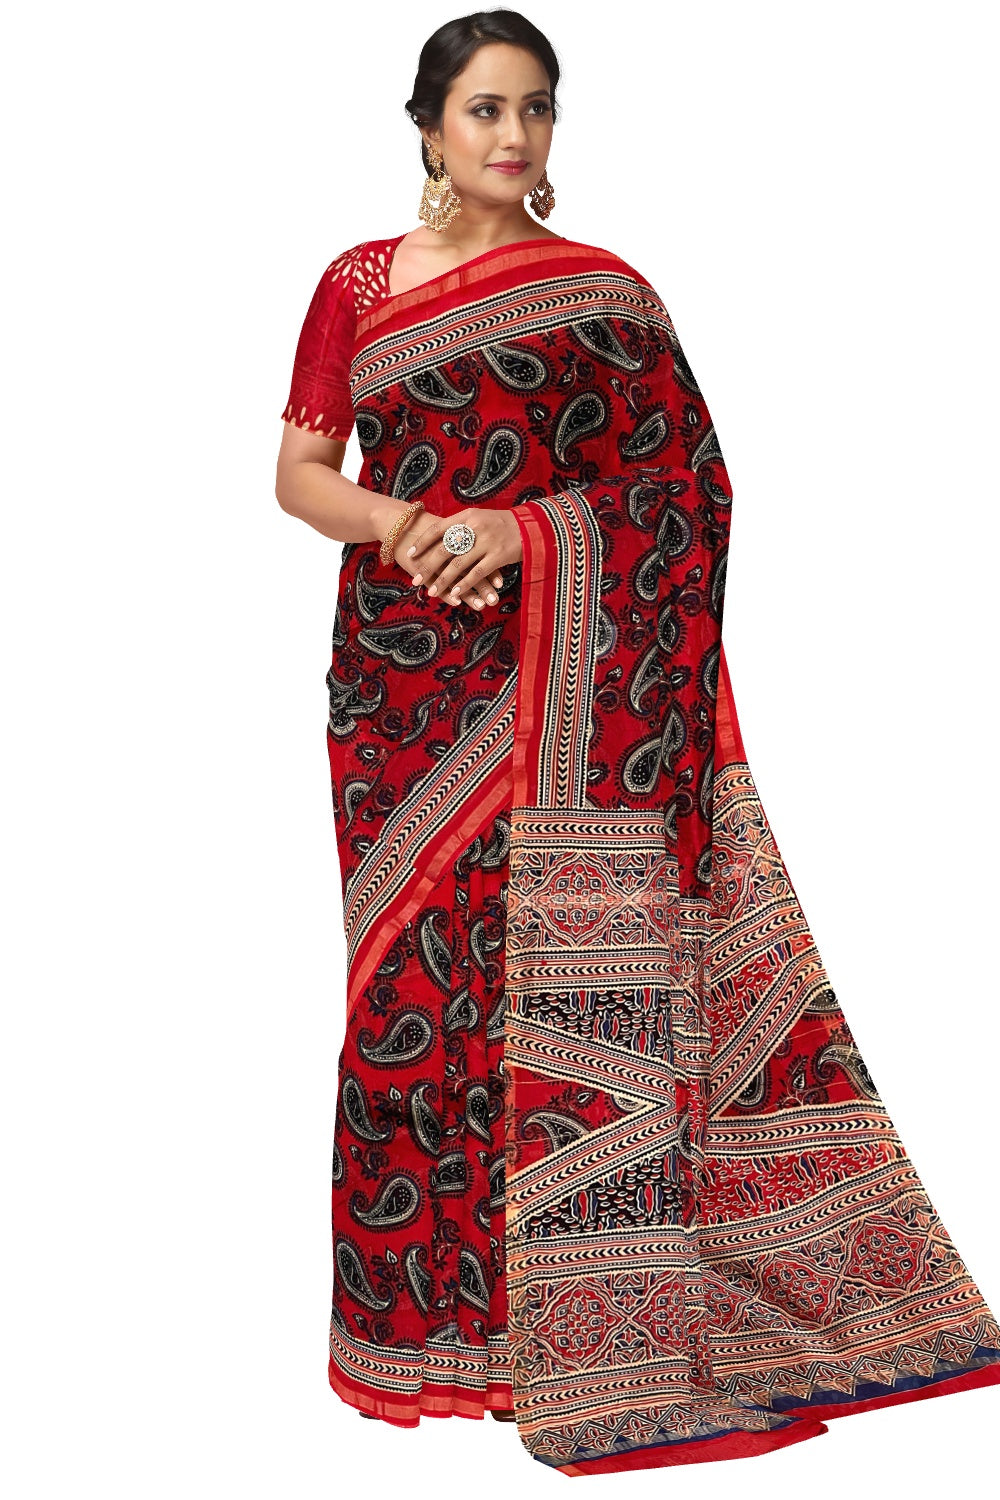 Southloom Cotton Red Paisley Design Saree with Ajrakh Printed Pallu